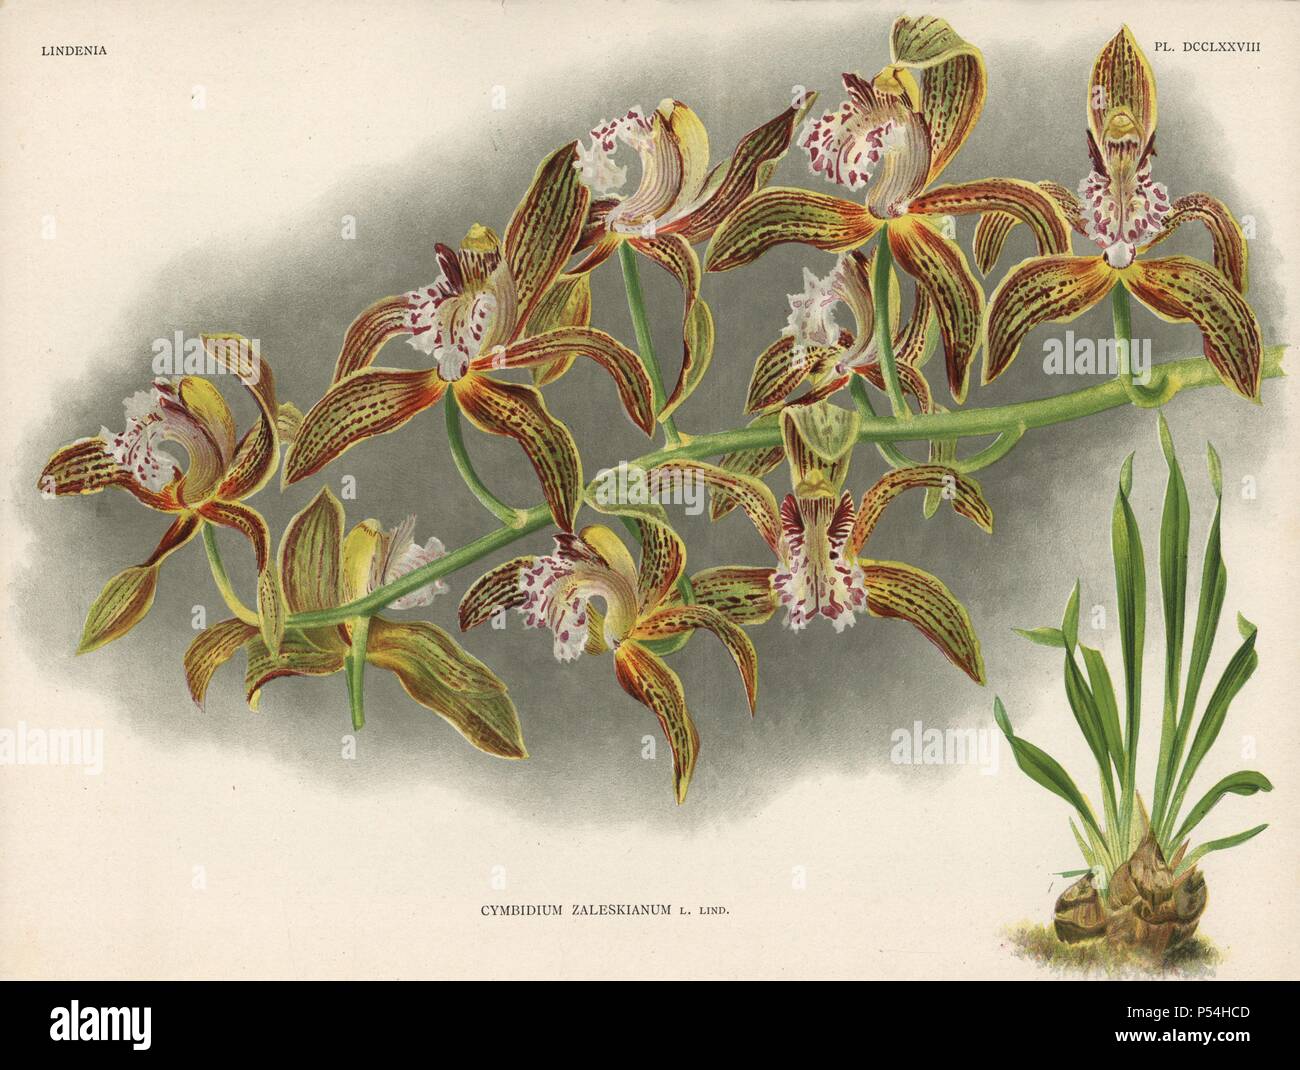 Mr. Zaleski's cymbidium orchid, Cymbidium zaleskianum L. Lind. Illustration drawn by C. de Bruyne and chromolithographed by S. de Leeuw from Lucien Linden's 'Lindenia, Iconographie des Orchidees,' Brussels, 1902. Stock Photo